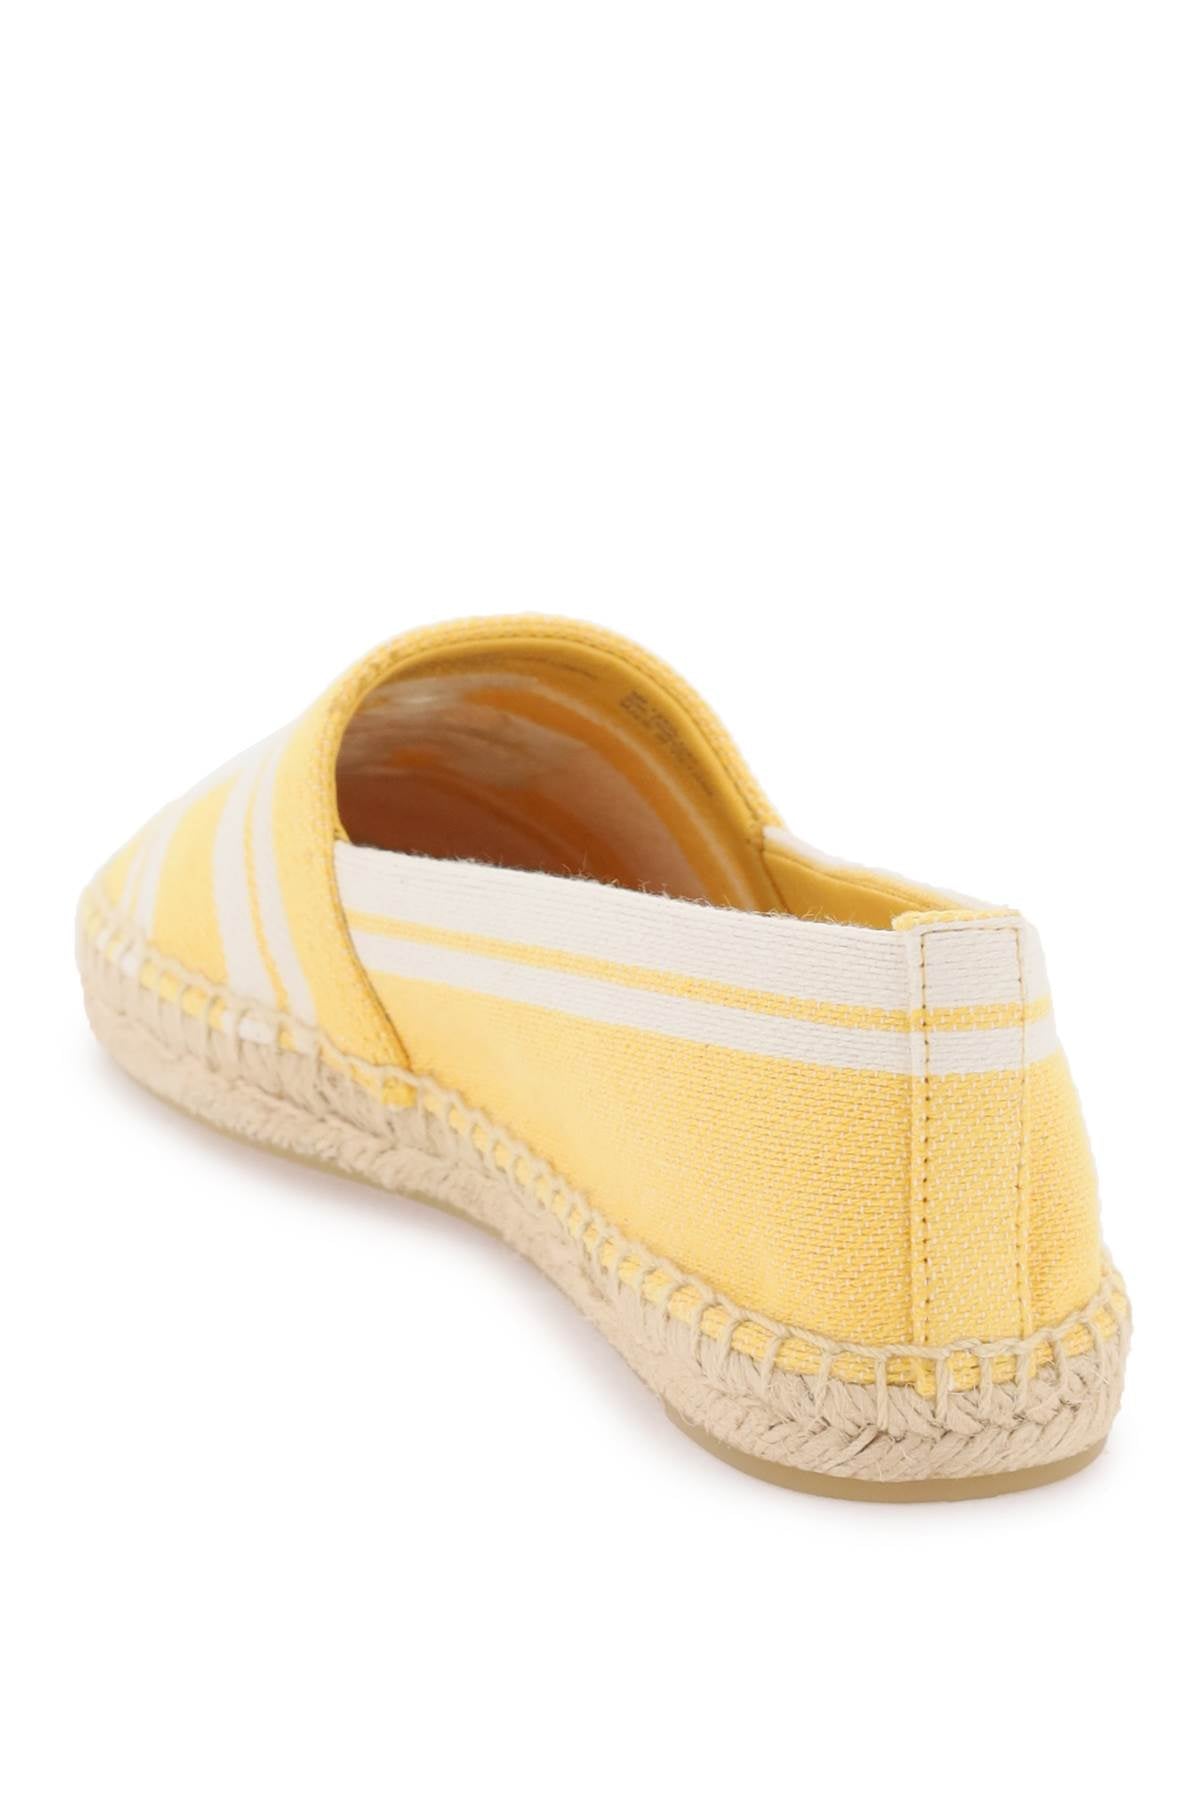 Tory Burch Tory burch striped espadrilles with double t